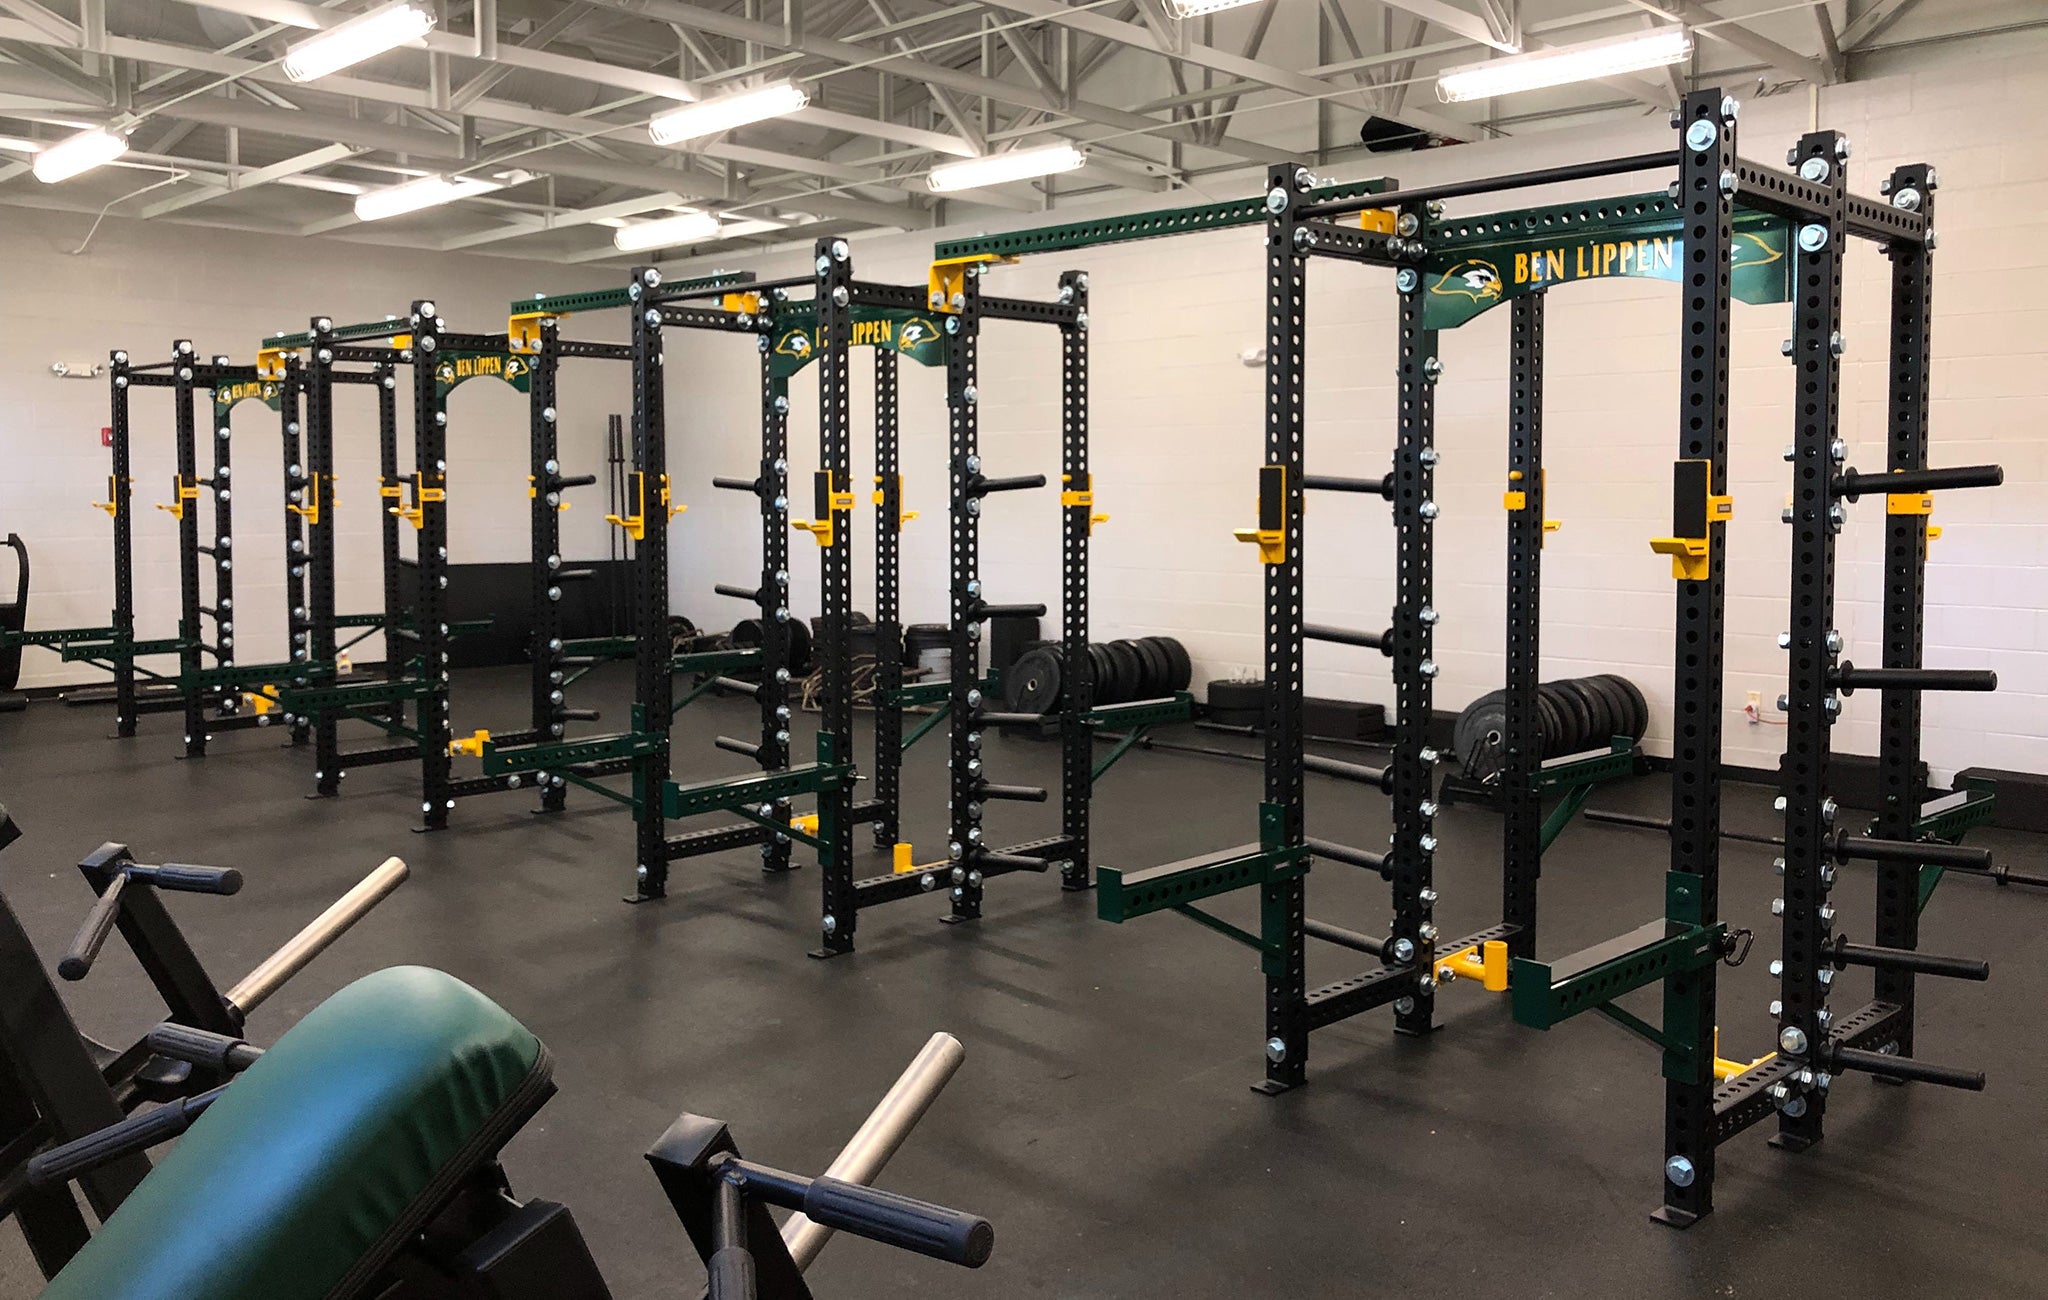 Ben Lippen High School strength and conditioning